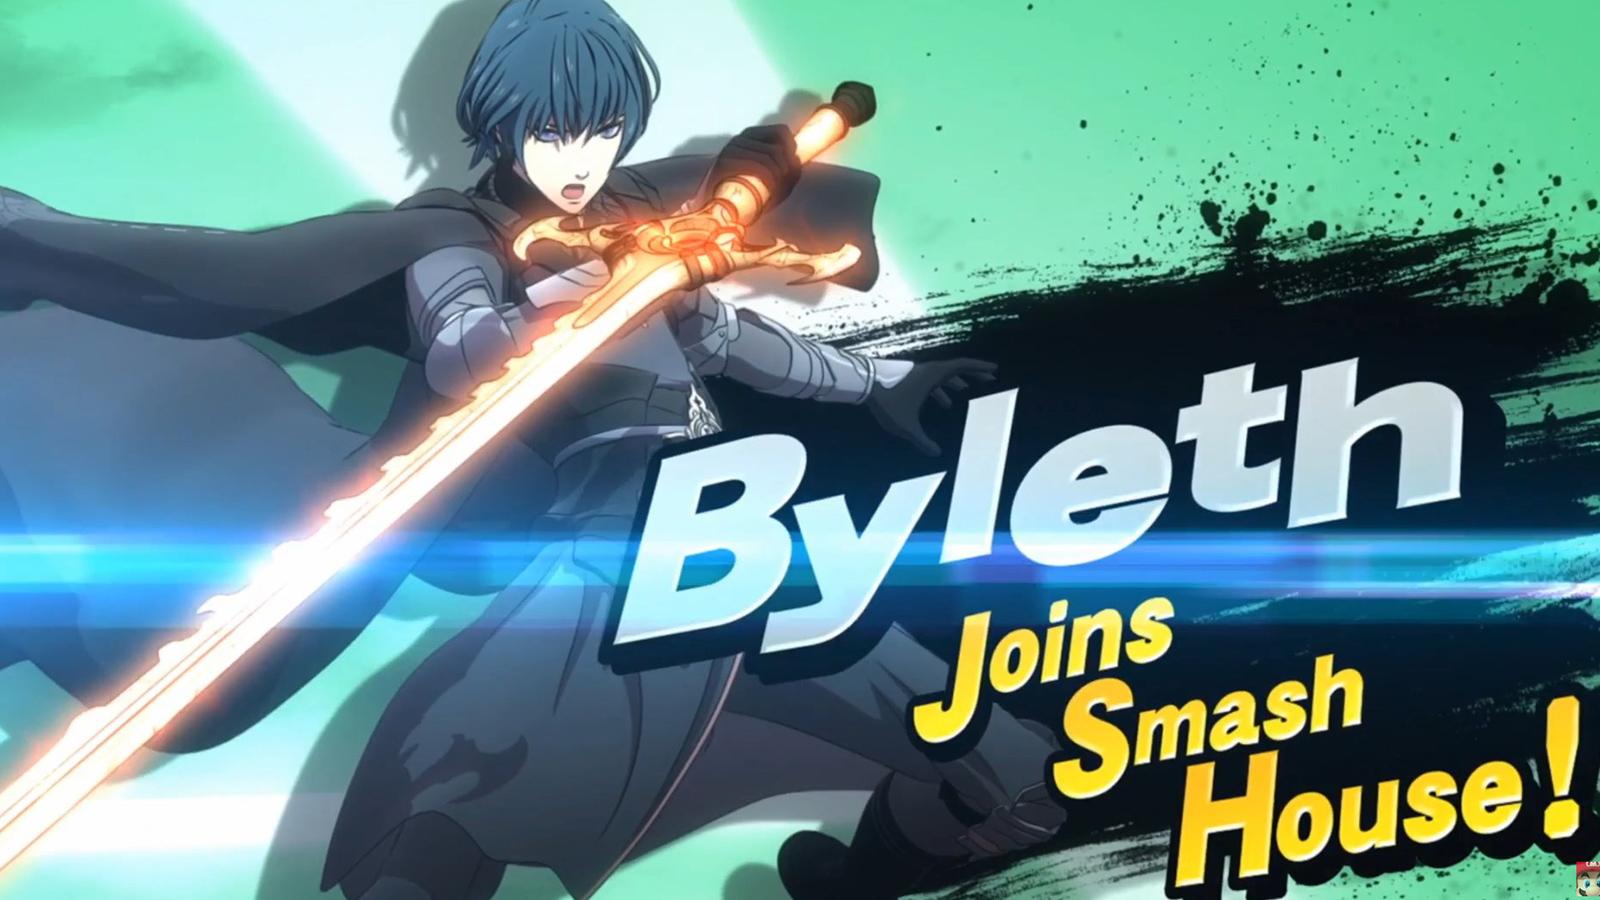 Fire Emblem's Byleth from the Super Smash Bros. Ultimate announcement.